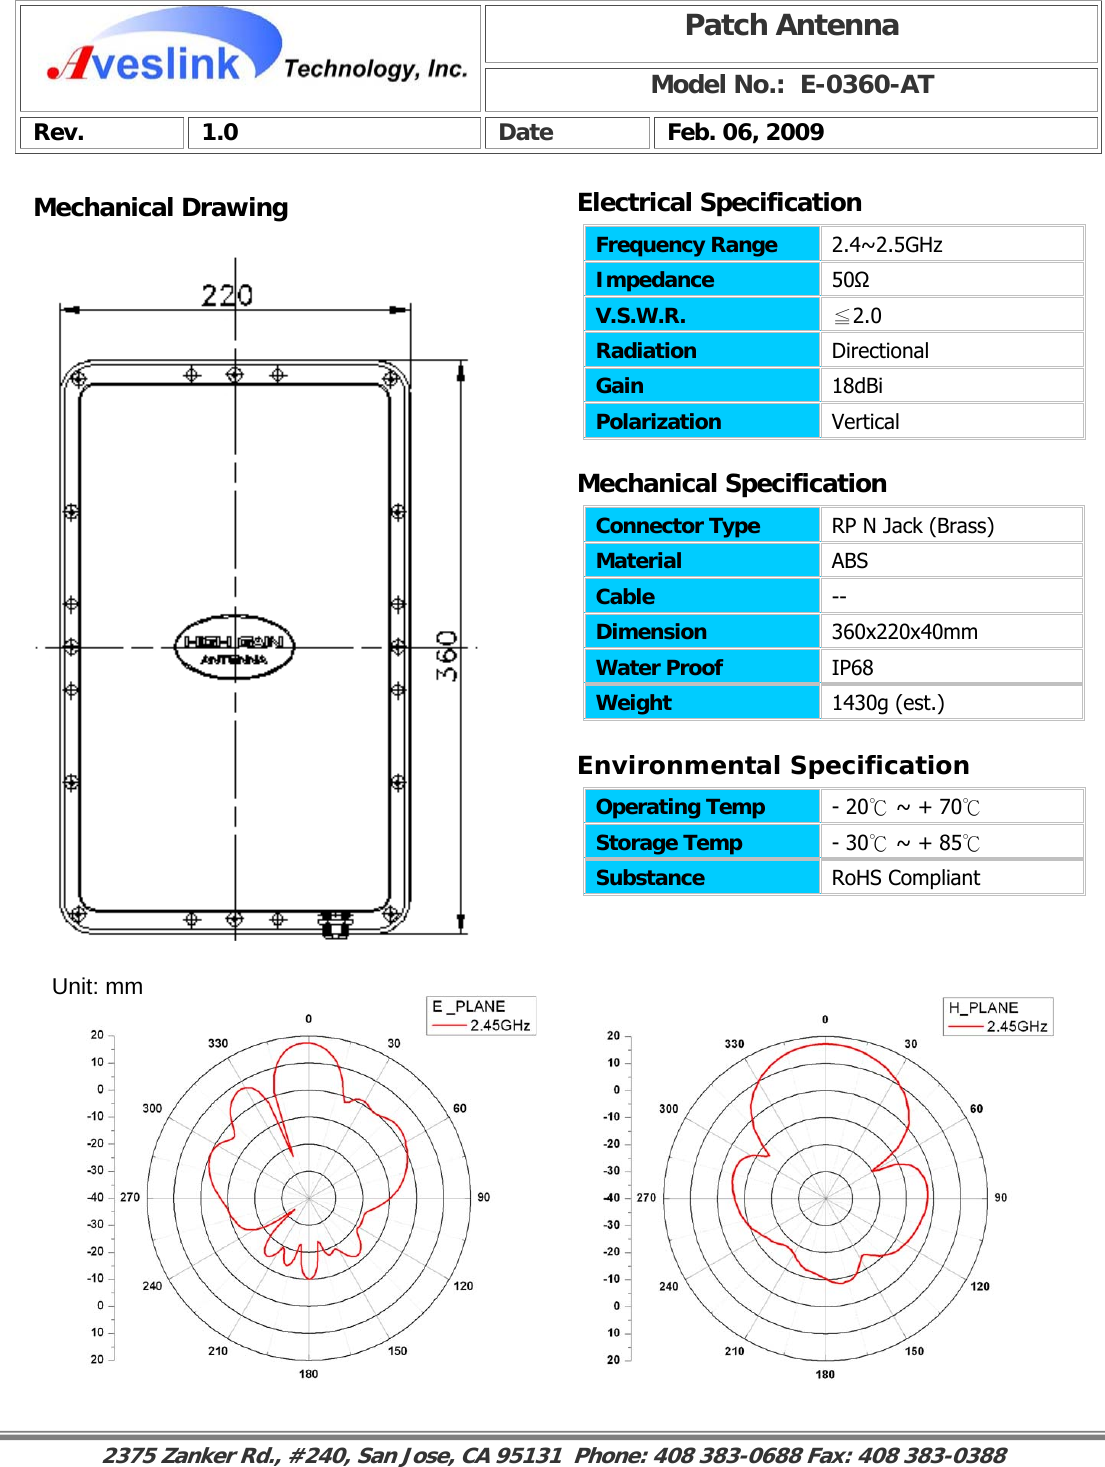 Mechanical DrawingMechanical Specification Environmental SpecificationPatch Antenna Model No.:  E-0360-AT Rev. 1.0  Date  Feb. 06, 2009 Connector Type   RP N Jack (Brass) Material  ABS Cable  -- Dimension  360x220x40mm Water Proof  IP68 Weight  1430g (est.)                                                                                                                                                                                                                    Operating Temp  - 20℃ ~ + 70℃ Storage Temp  - 30℃ ~ + 85℃ Substance  RoHS Compliant Electrical SpecificationFrequency Range   2.4~2.5GHz Impedance  50Ω V.S.W.R.  ≦2.0 Radiation  Directional Gain  18dBi Polarization  Vertical Unit: mm 2375 Zanker Rd., #240, San Jose, CA 95131  Phone: 408 383-0688 Fax: 408 383-0388